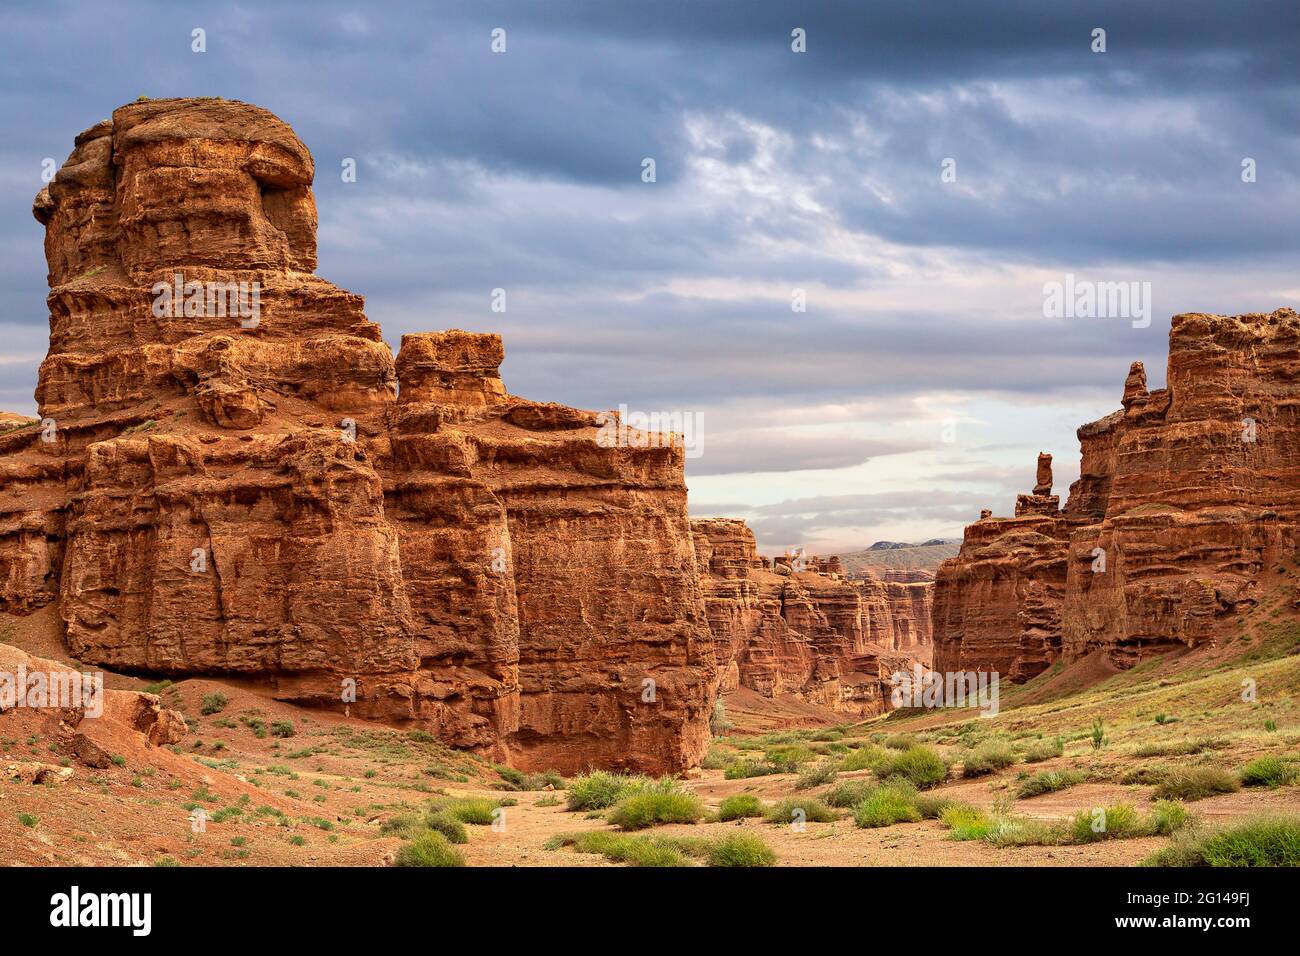 Geological rock formations in Charyn Canyon, Kazakhstan Stock Photo